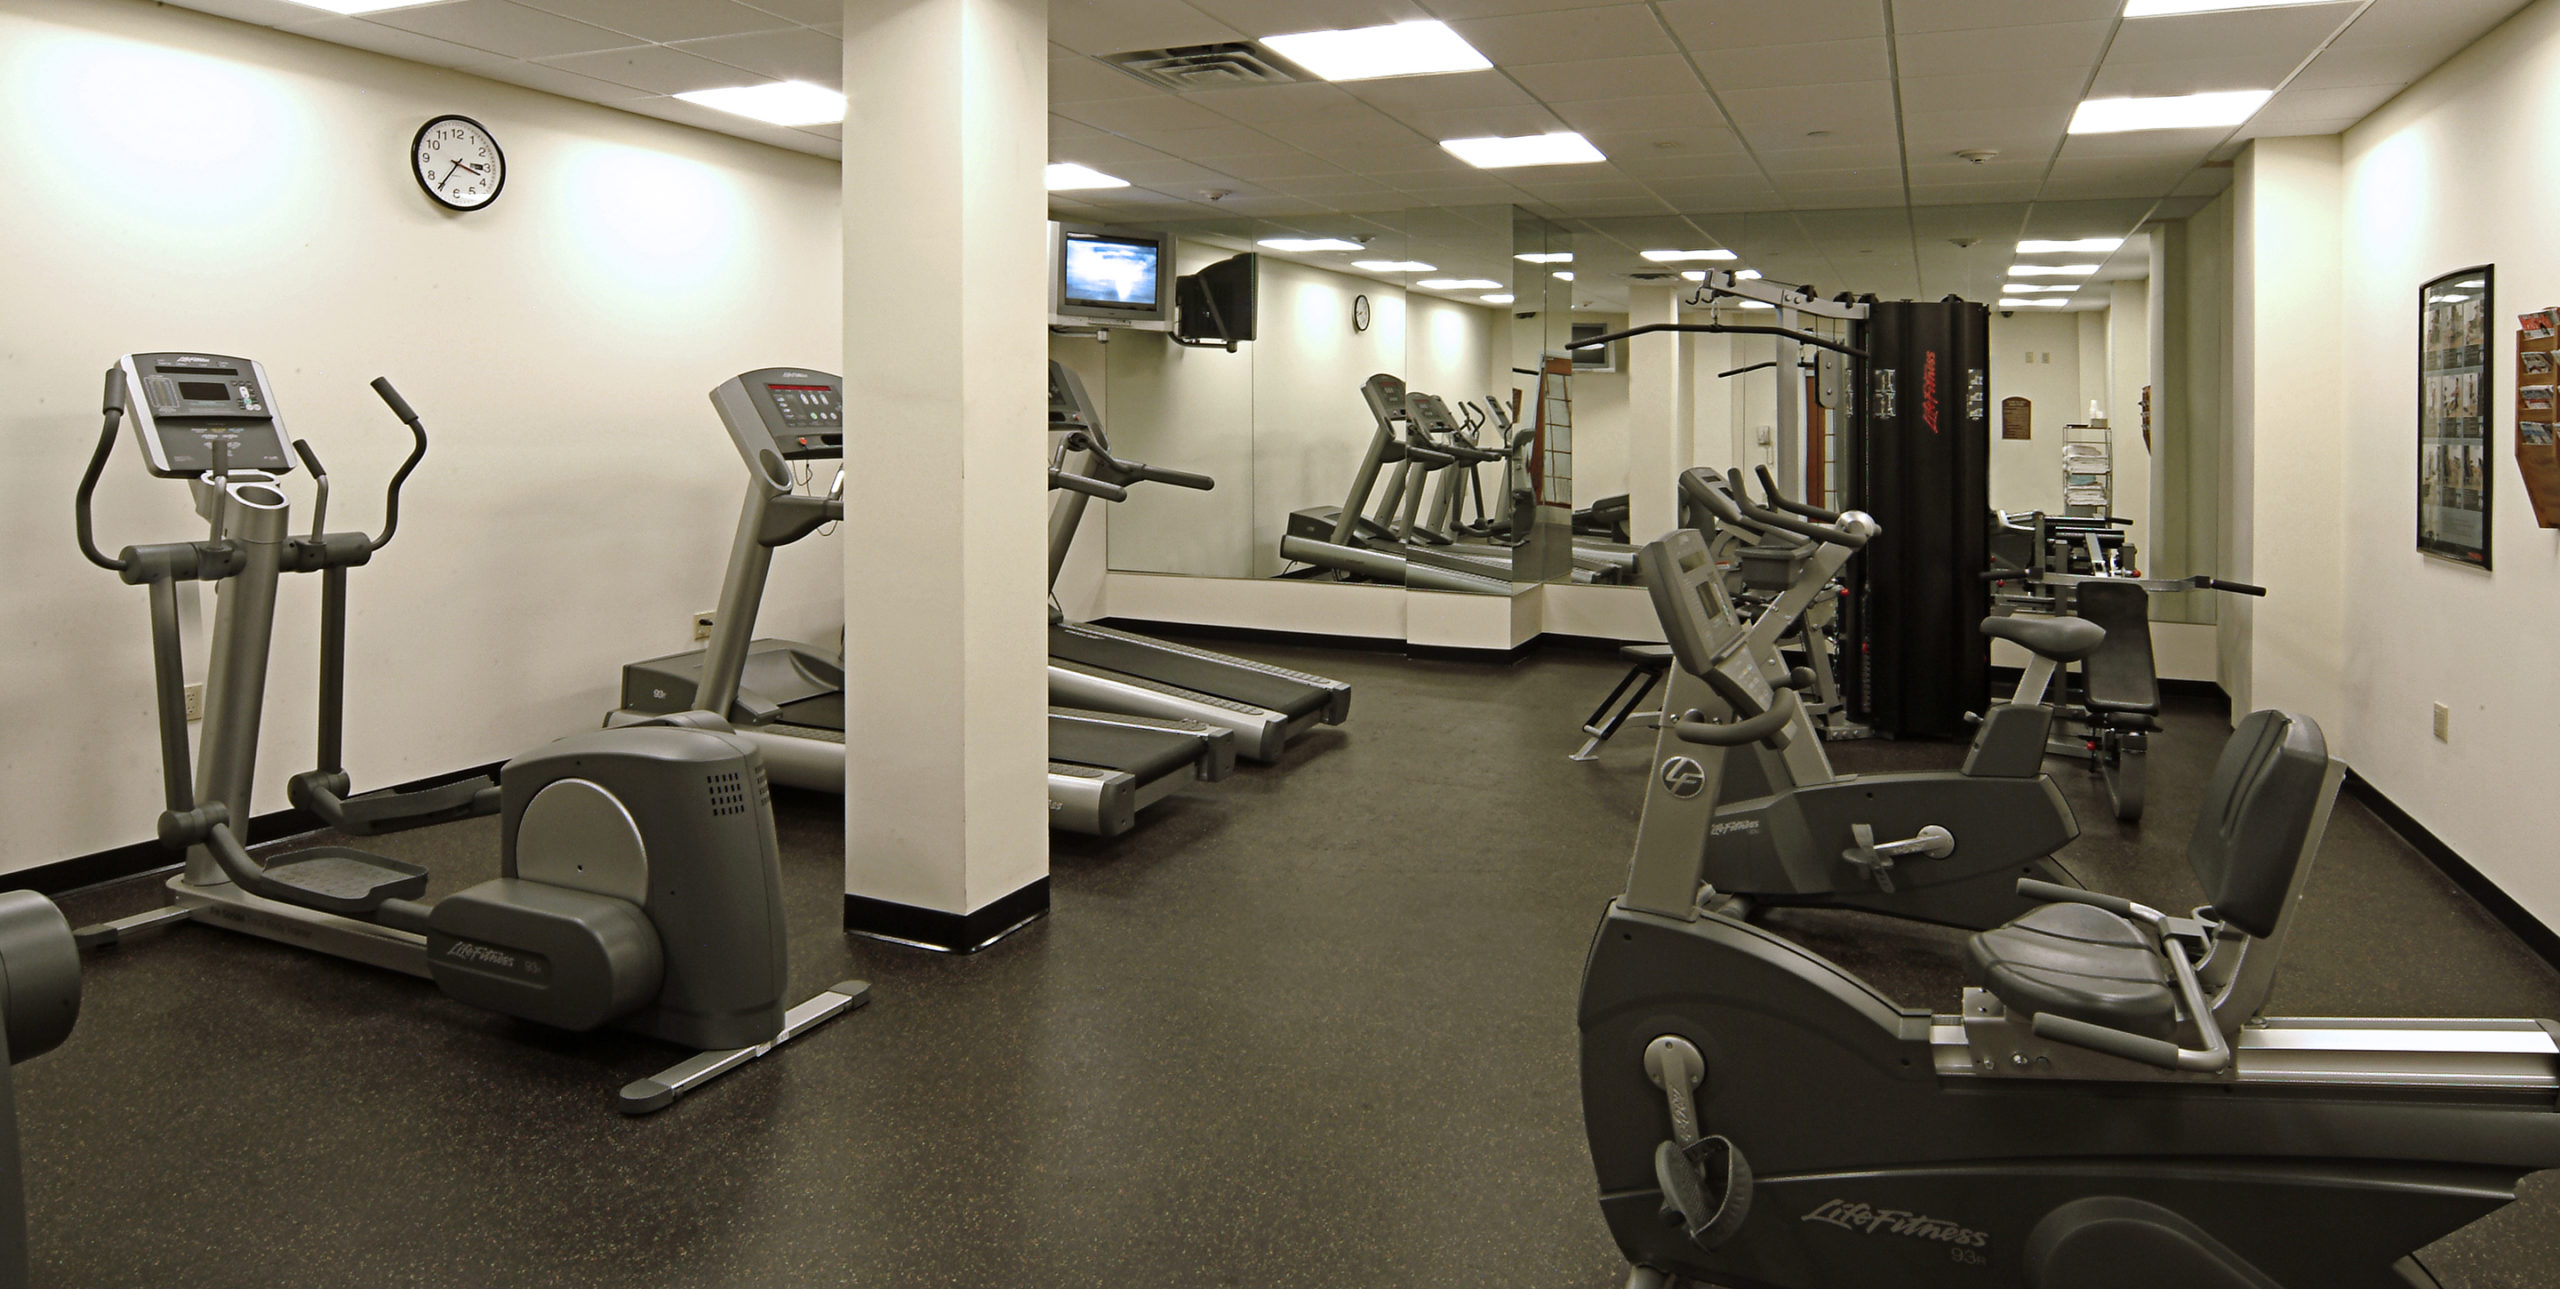 Gym at Holiday Inn Express at 1707 Old Country Road, Riverhead